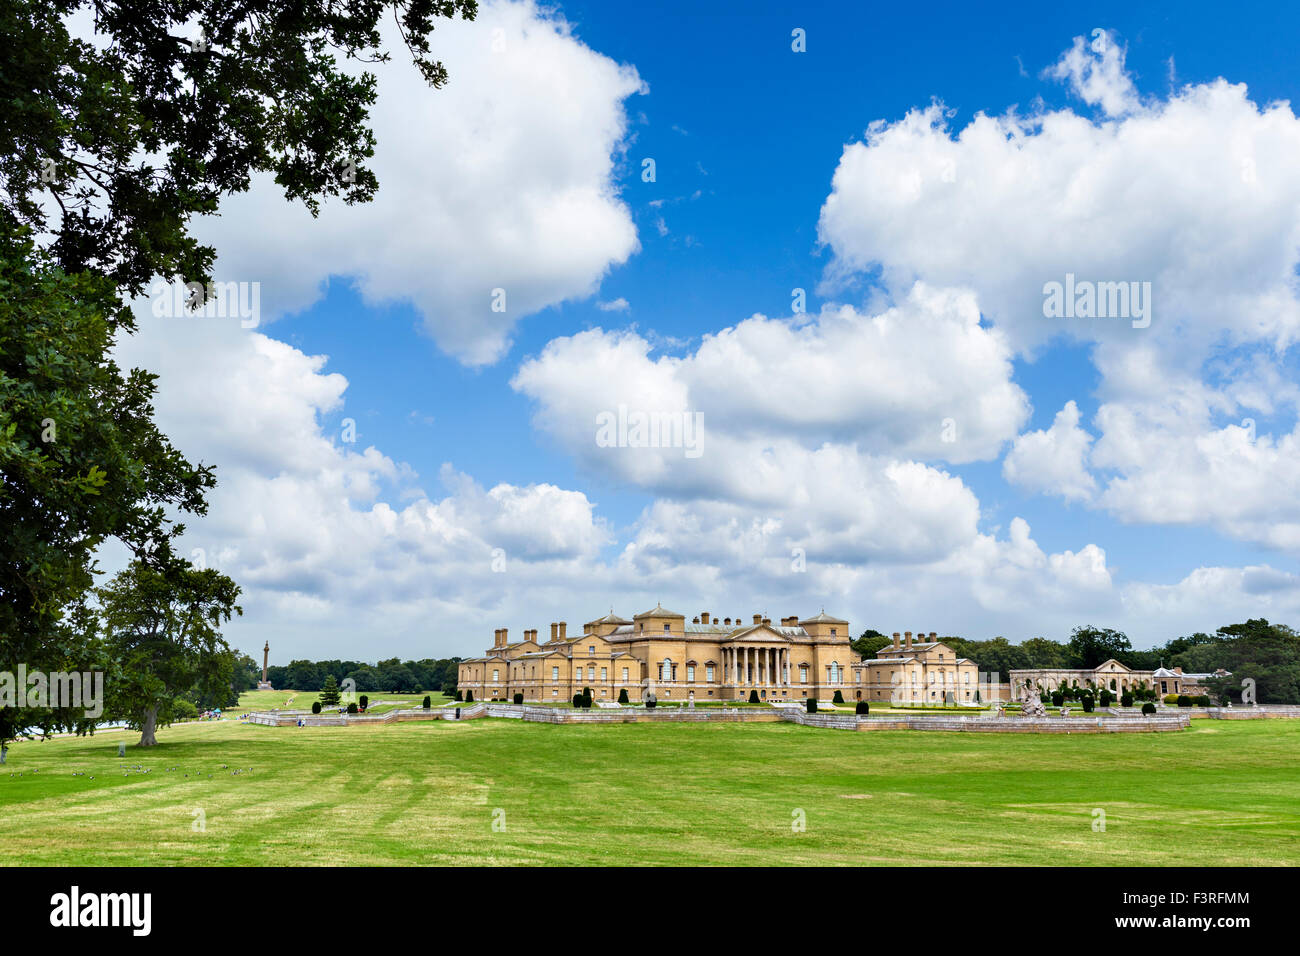 Holkham Hall, un inizio settecento Palladian country house in Holkham, Norfolk, Inghilterra, Regno Unito Foto Stock